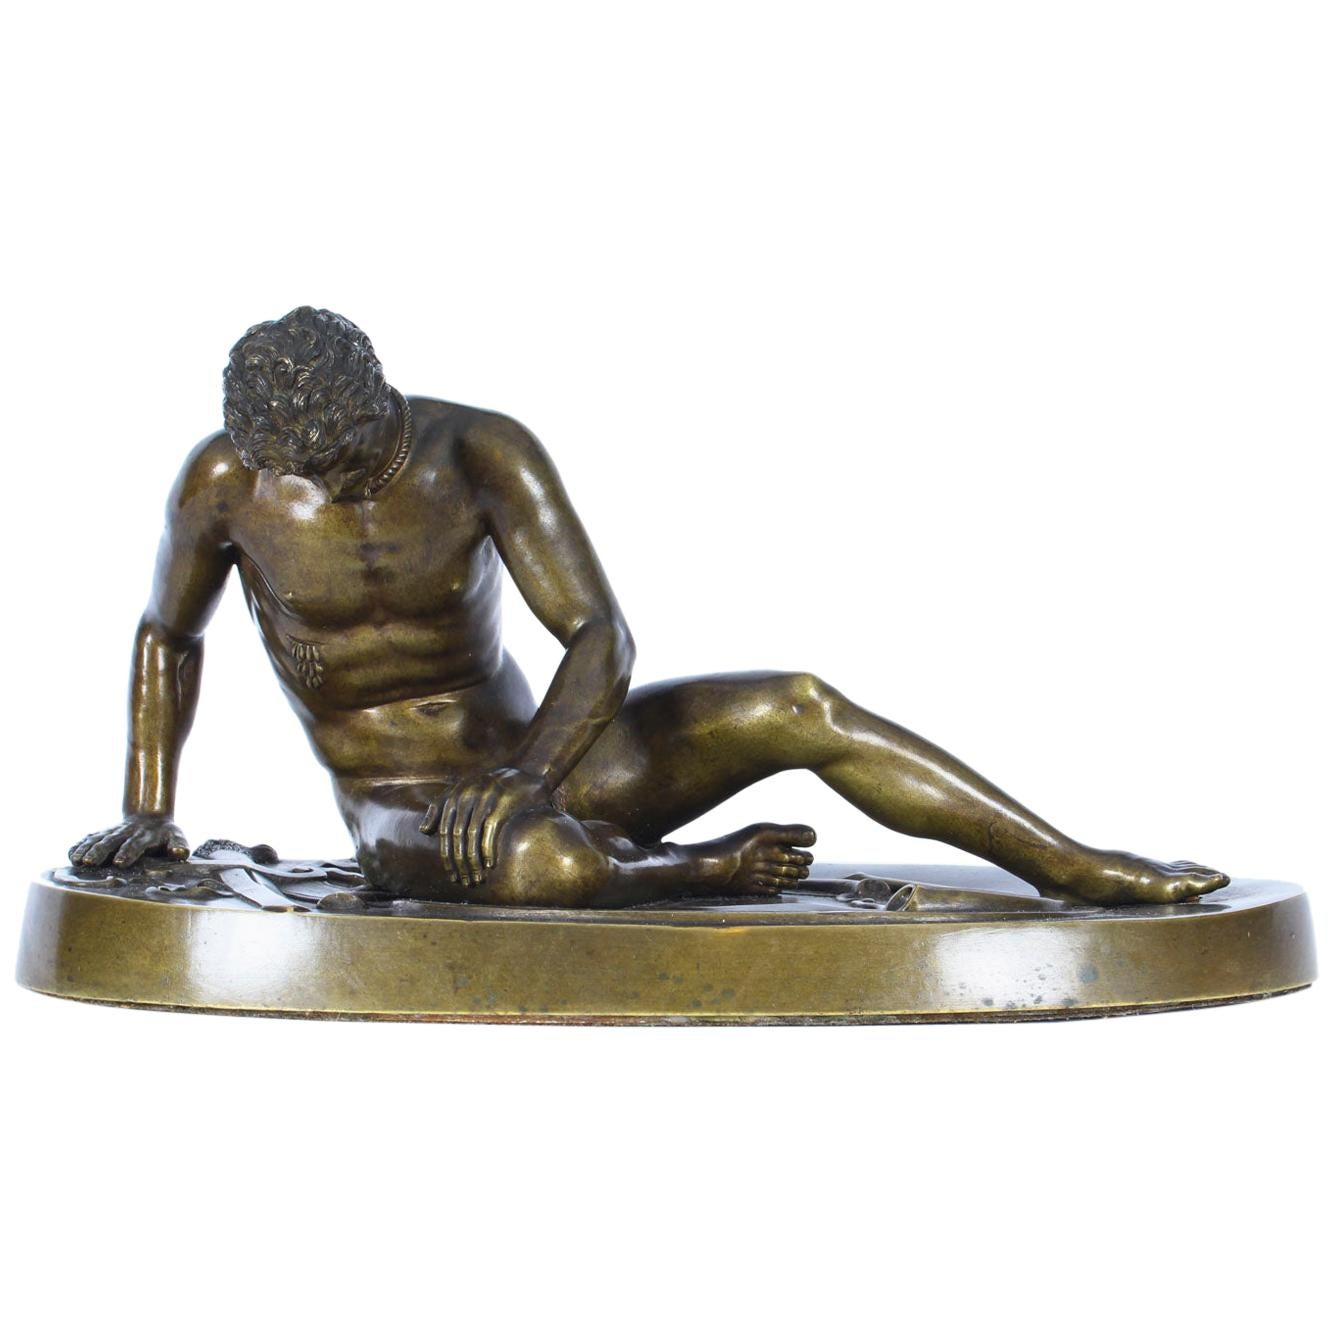 Antique Italian Grand Tour Bronze Sculpture of The Dying Gaul, 19th Century